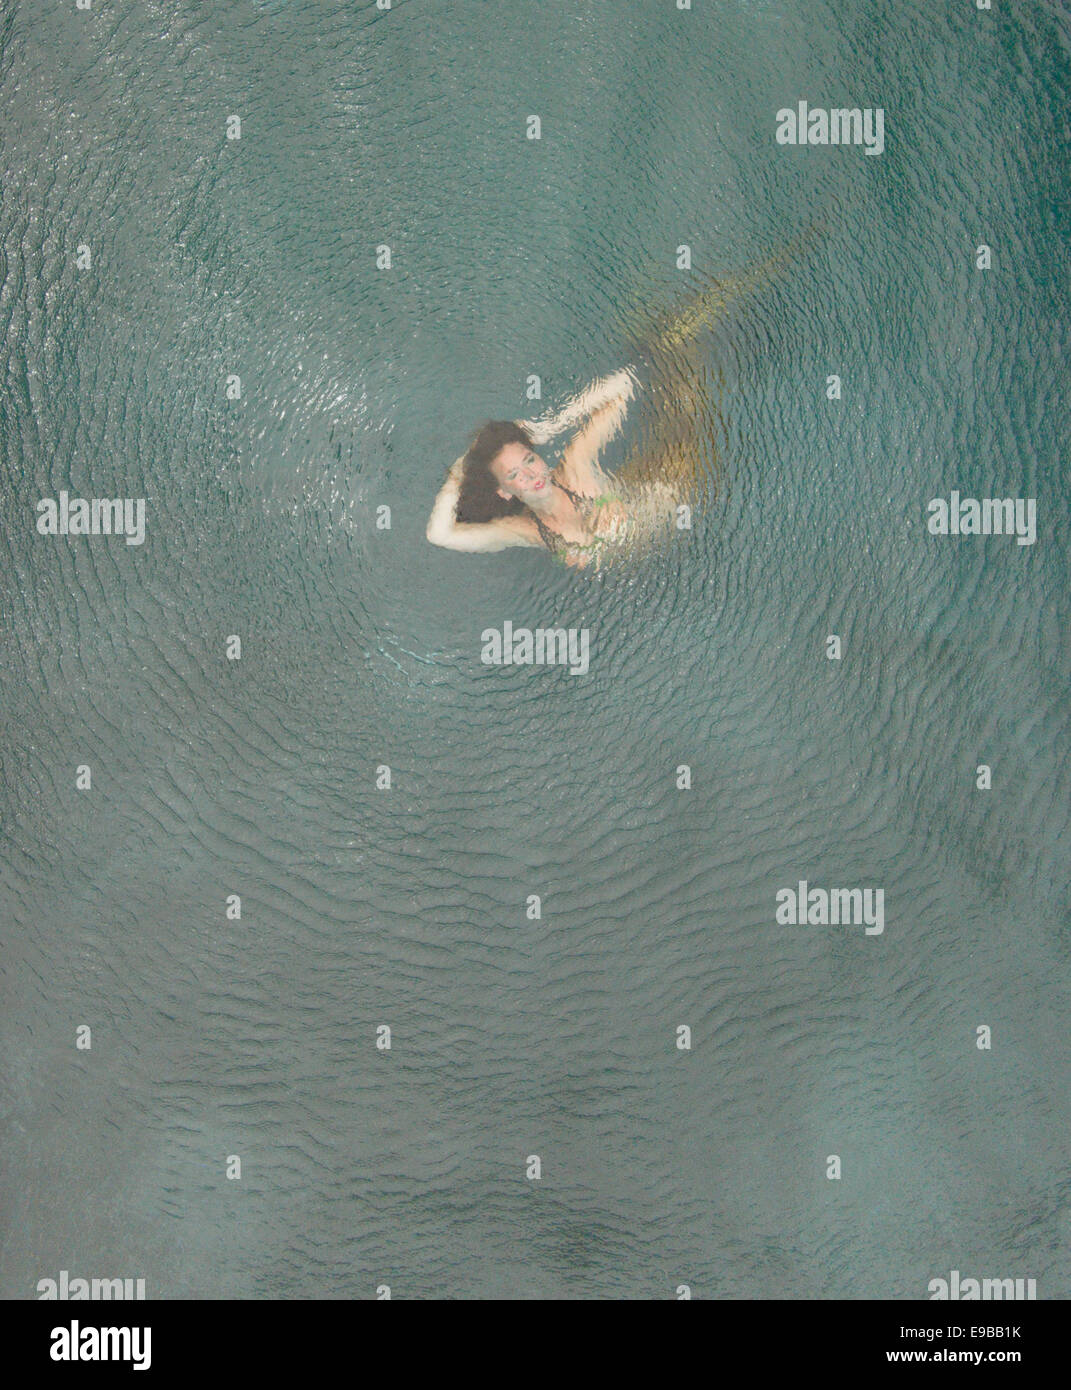 Aerial photo of a mermaid in a swimming pool with ripples from drone's props Stock Photo